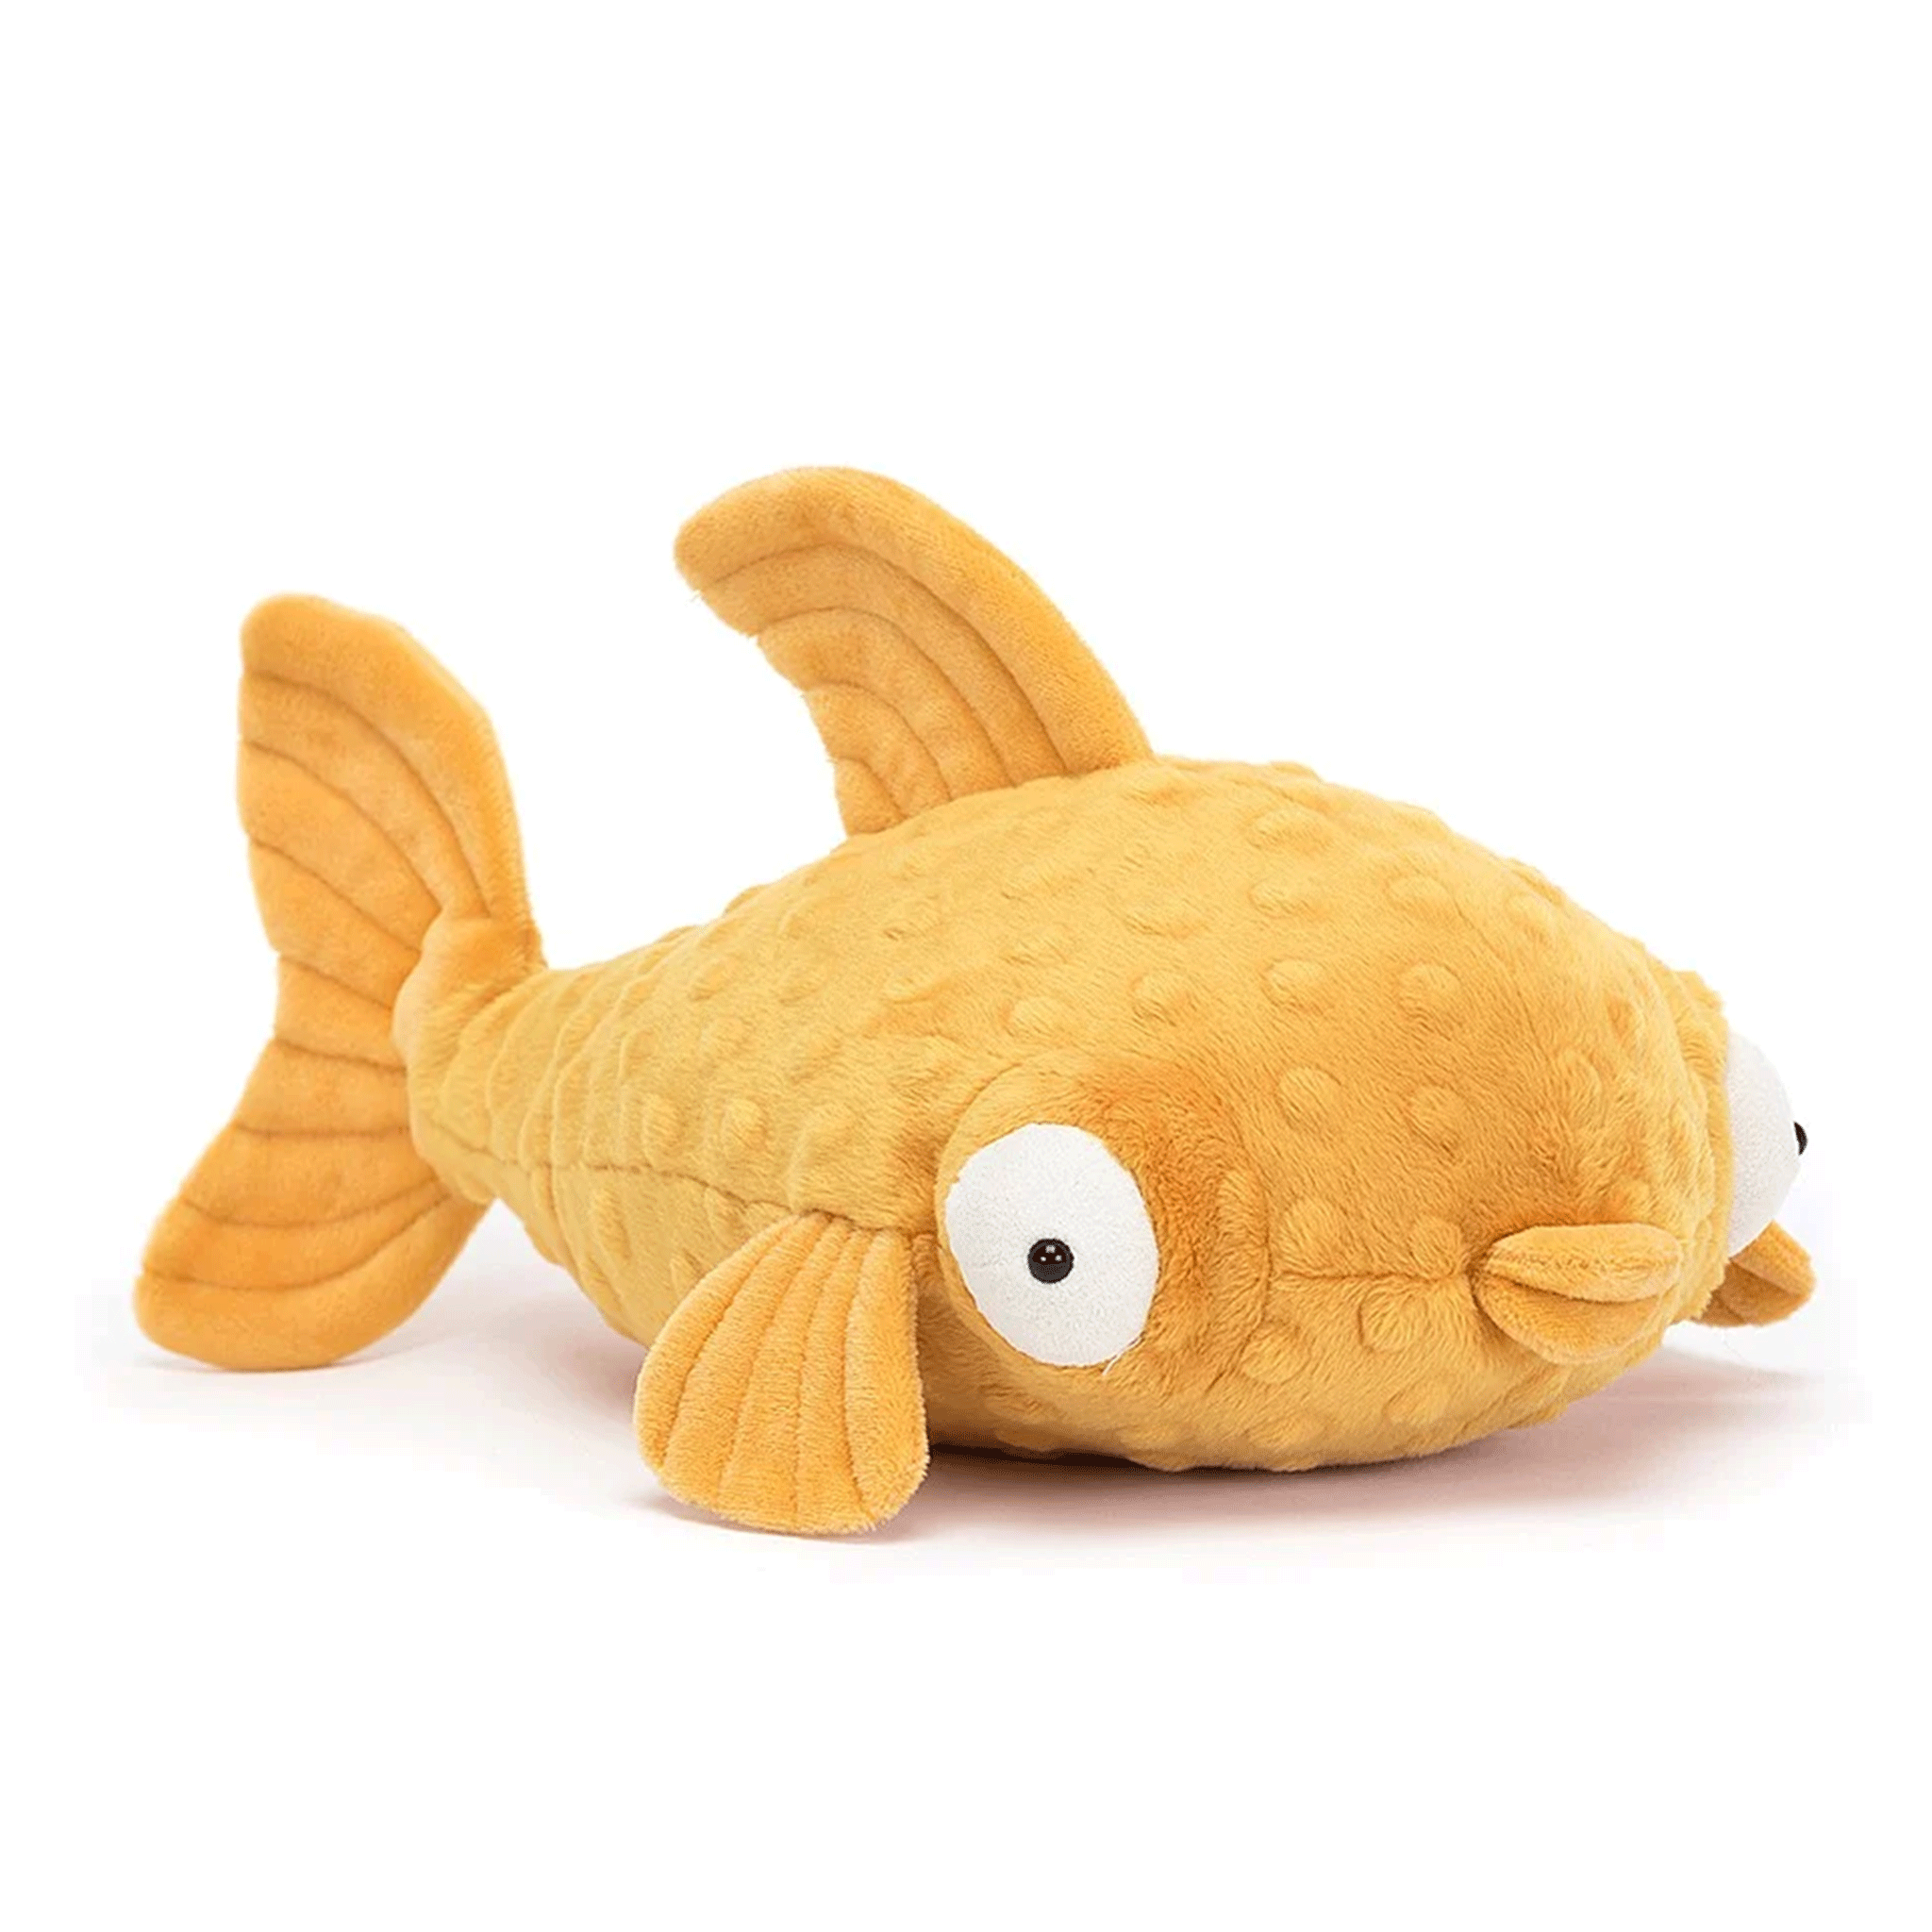 On a white background is a yellow stuffed toy fish with puffy eyes and lips. 